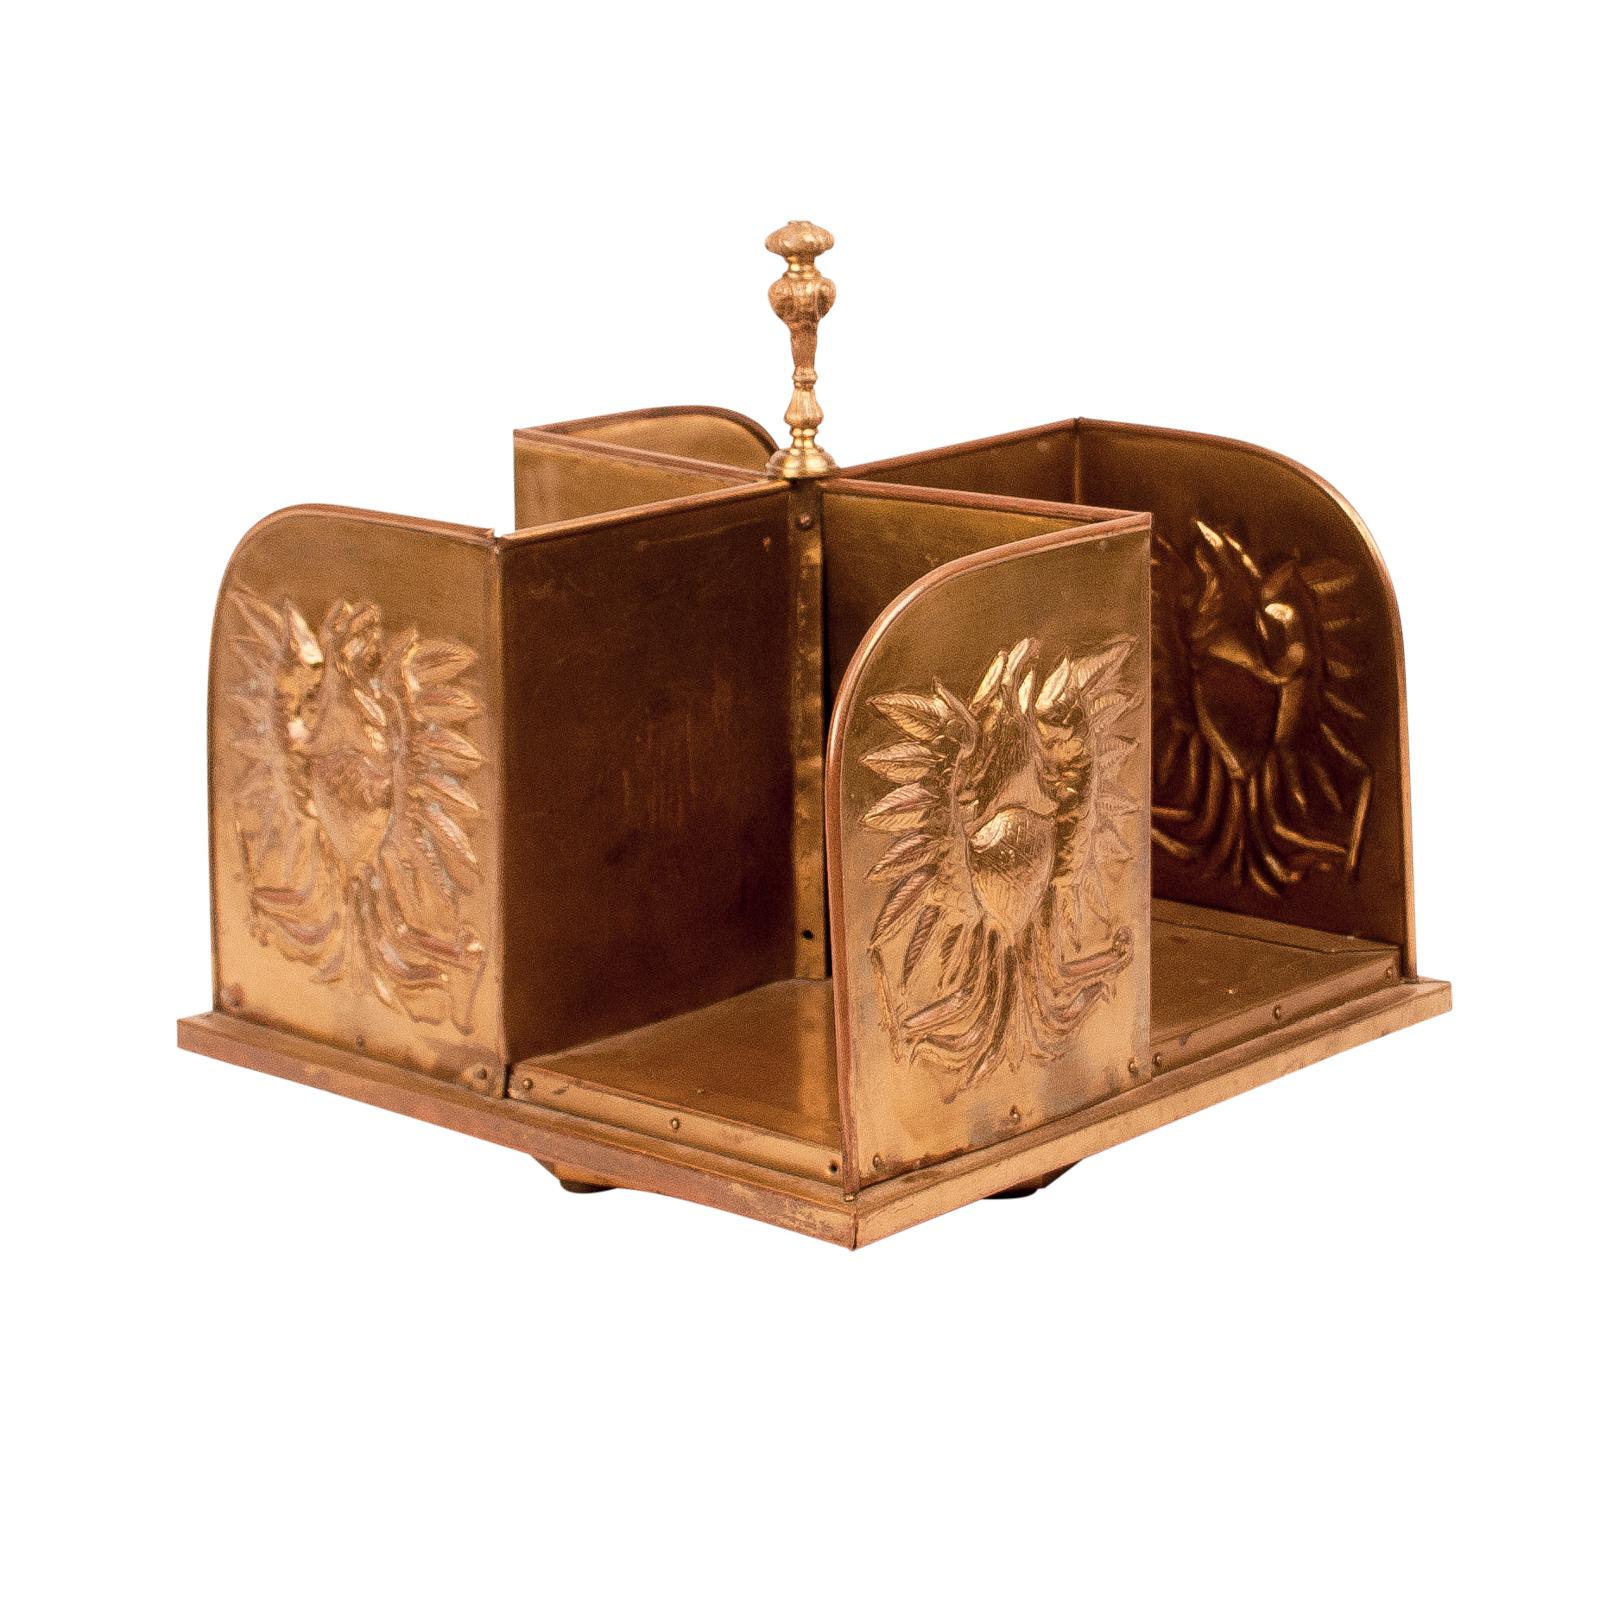 A swivel brass book caddy embossed with an eagle, circa 1900.